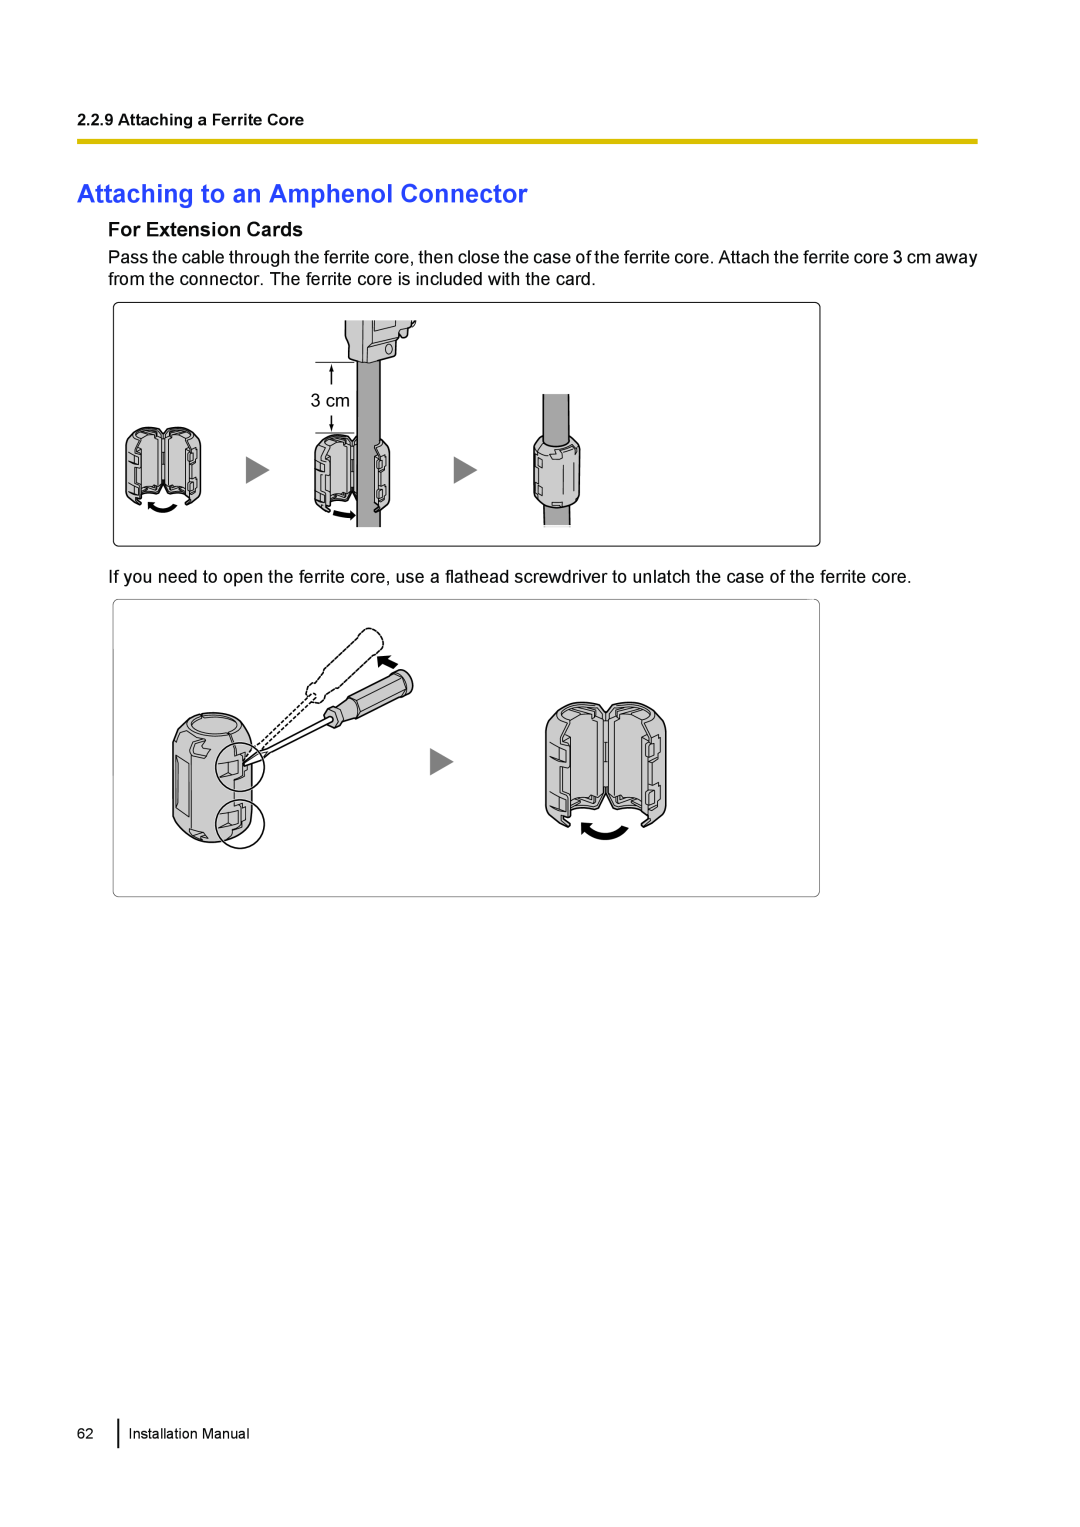 Panasonic KX-TDA100 installation manual Attaching to an Amphenol Connector, For Extension Cards 